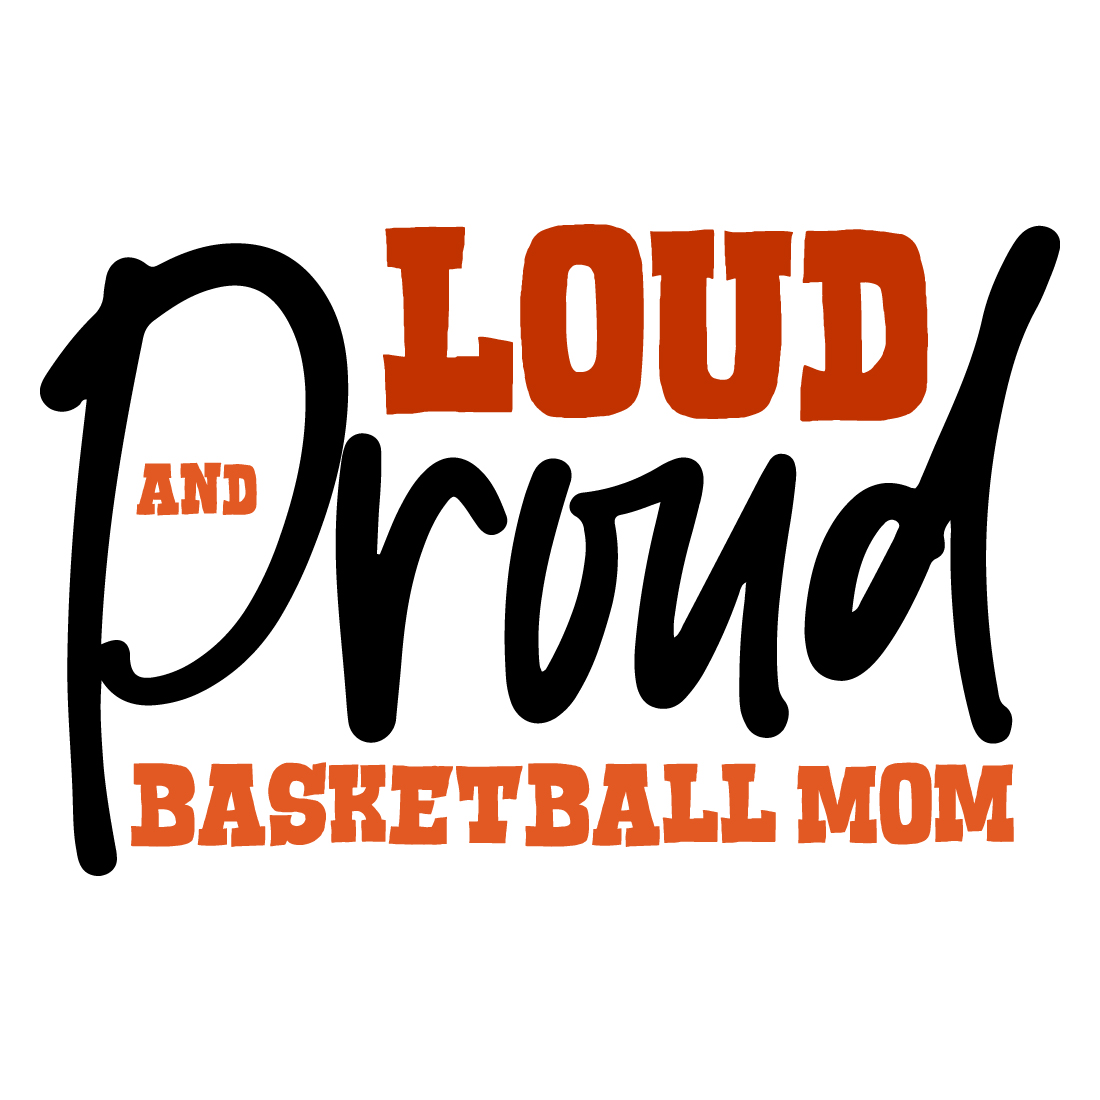 Loud and Proud Basketball Mom cover image.